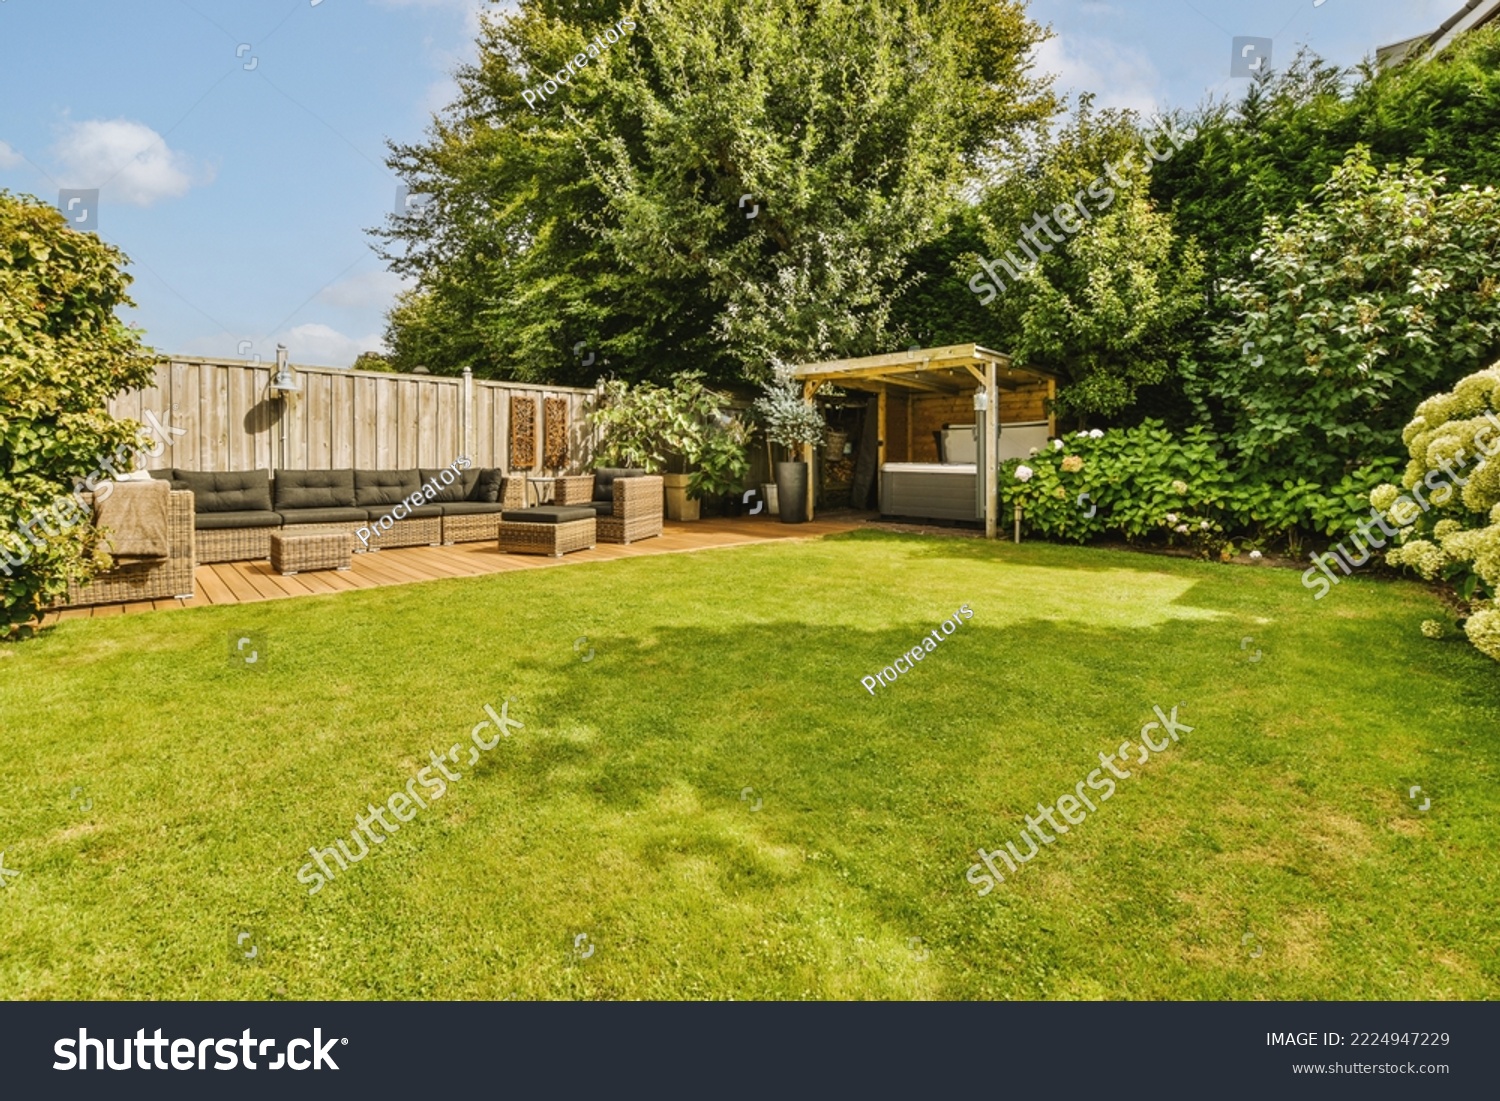 Neat paved patio with sitting area and small garden near wooden fence #2224947229